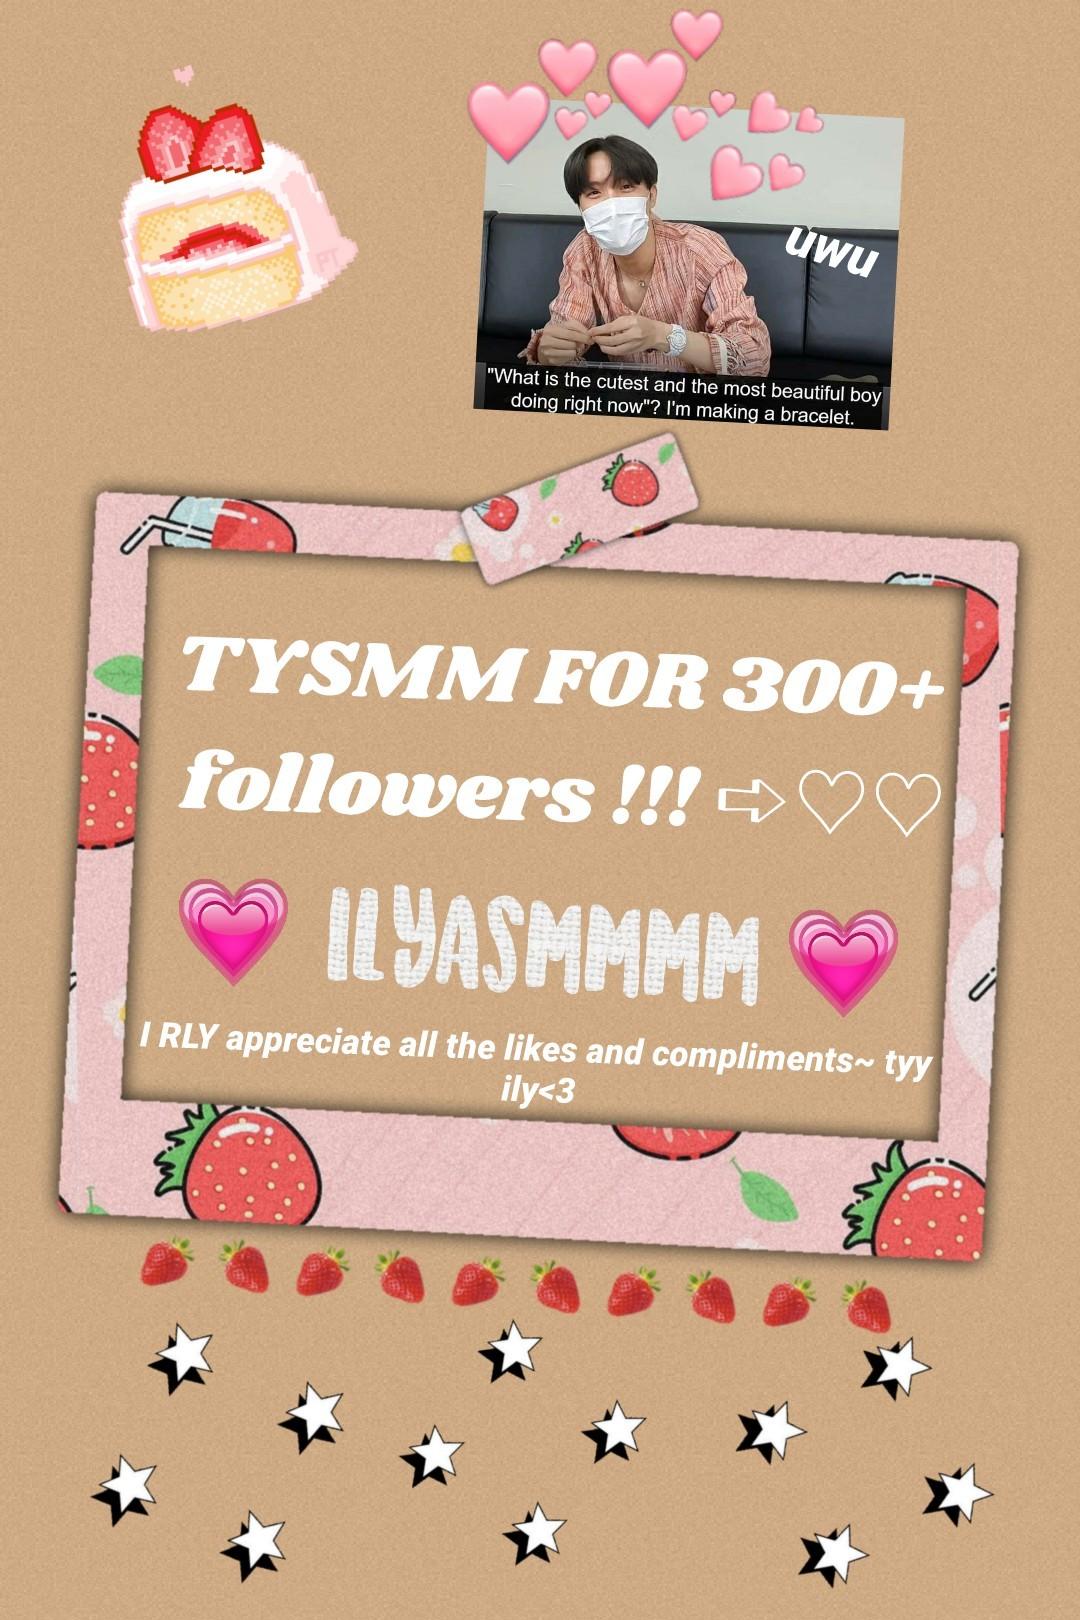 ➪︎ 𝒕𝒂𝒑 

°♡︎ 𝘁𝗵𝗮𝗻𝗸 𝘆𝗼𝘂 to 300+ people who r following me 😭💖 since I have started pc I've met such 𝒌𝒊𝒏𝒅 ❥︎ and 𝒈𝒆𝒏𝒆𝒓𝒐𝒖𝒔 ❥︎ 𝒕𝒂𝒍𝒆𝒏𝒕𝒆𝒅 ❥︎ people 
~ once again im ➪︎sᴜᴘᴇʀ ᴛʜᴀɴᴋғᴜʟ for every single follow, like, and comment 💖 ℎ𝑜𝑝𝑒 𝑦𝑜𝑢𝑛 ℎ𝑎𝑣𝑒 𝑎 𝐺𝑟𝑒𝑎𝑡 𝐷𝑎𝑦𝑦𝑦!! ✰︎✰︎